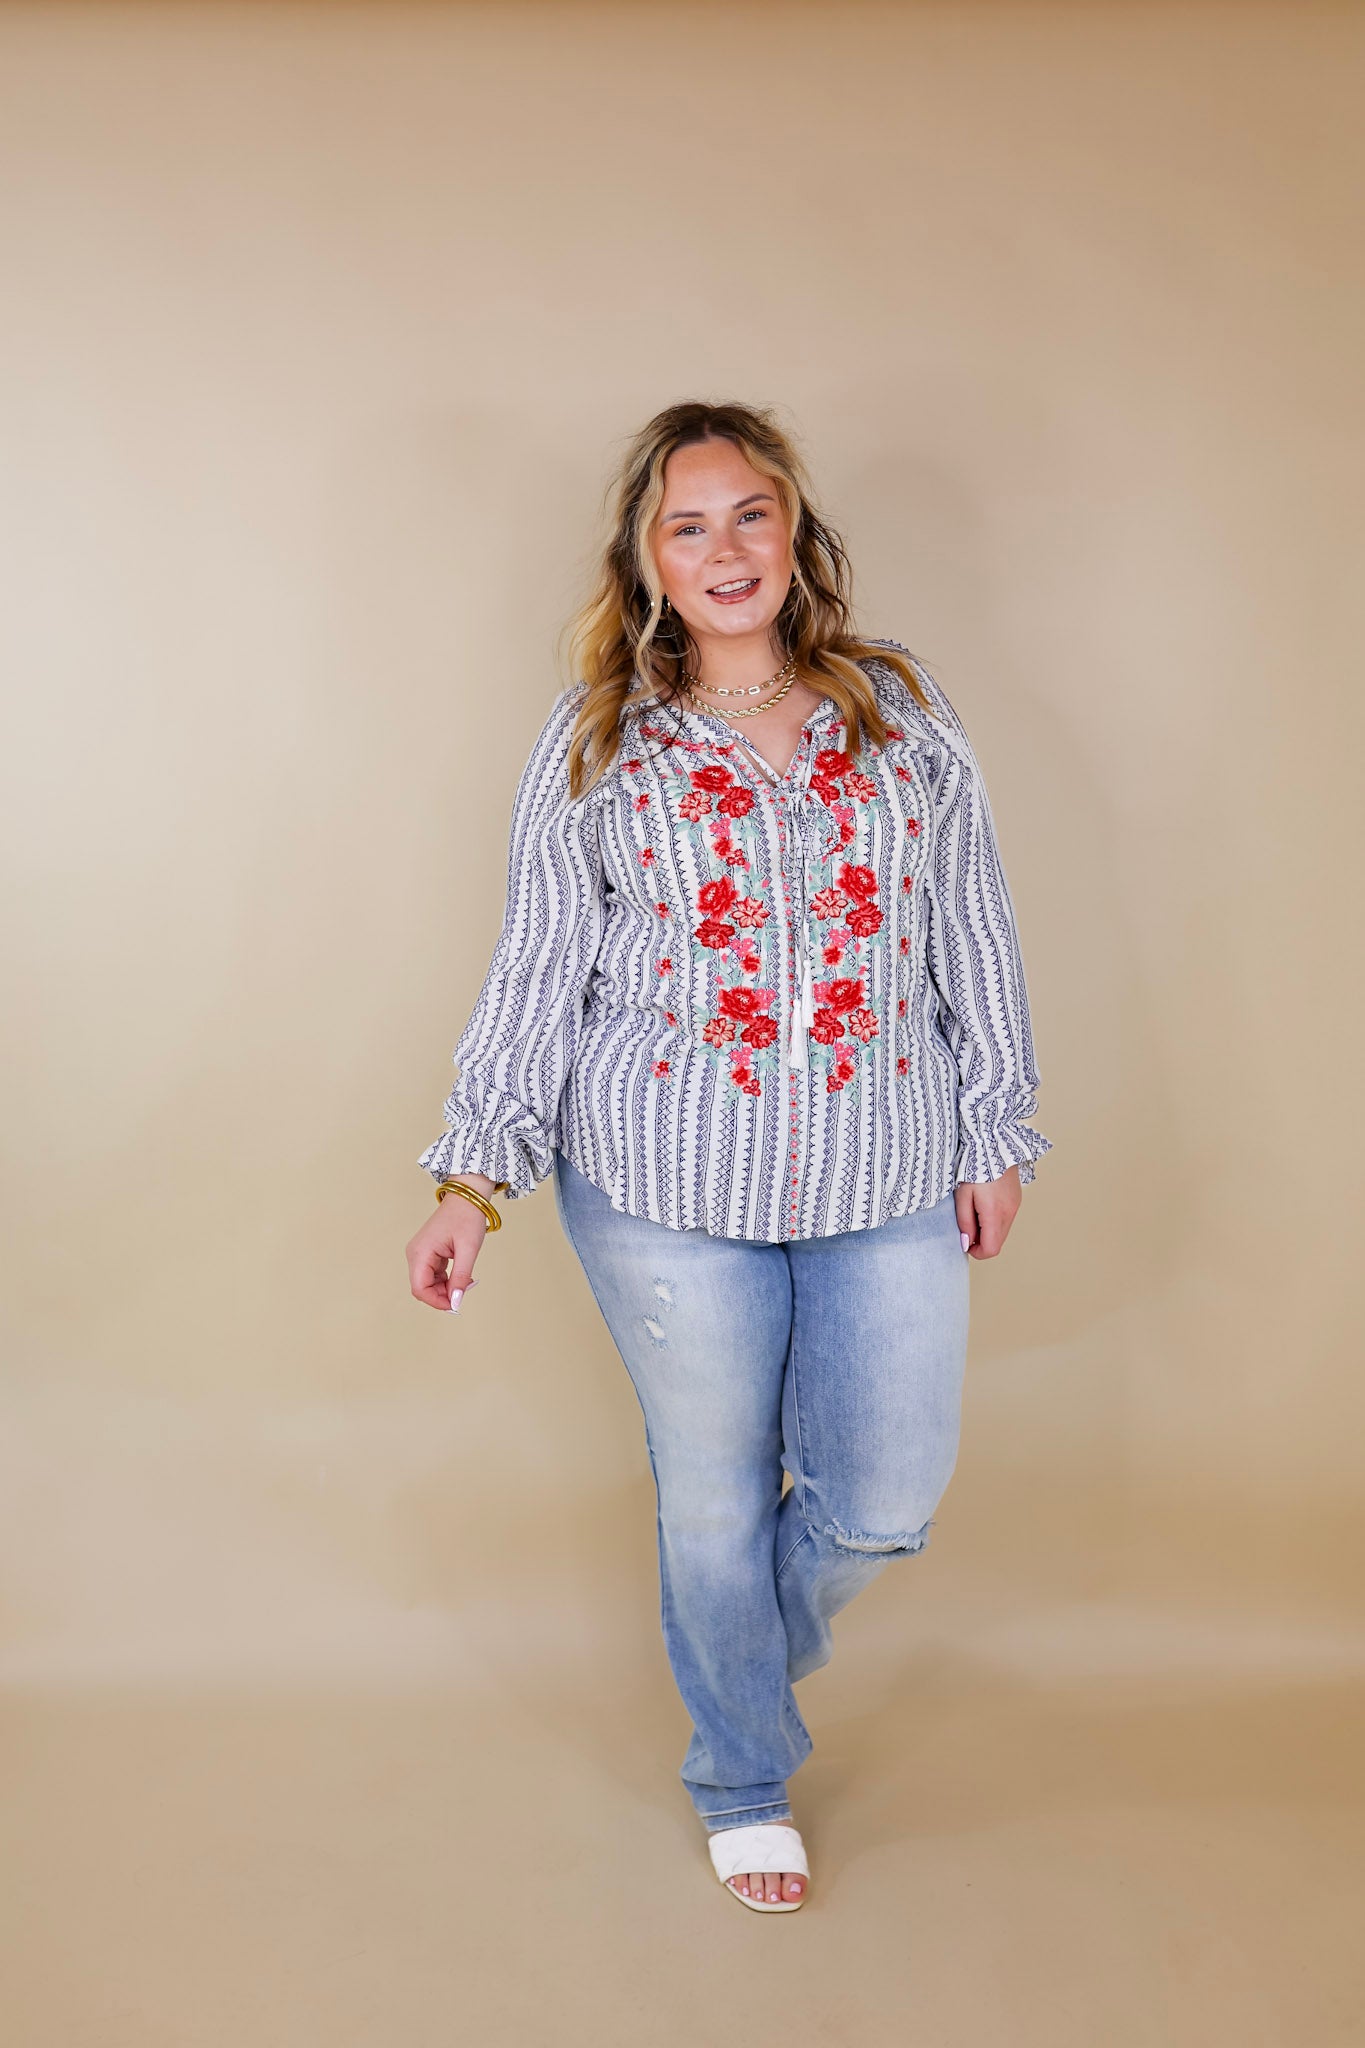 Blissful Beginnings Floral Embroidered Top with Keyhole and Tie Neck in Navy and White - Giddy Up Glamour Boutique